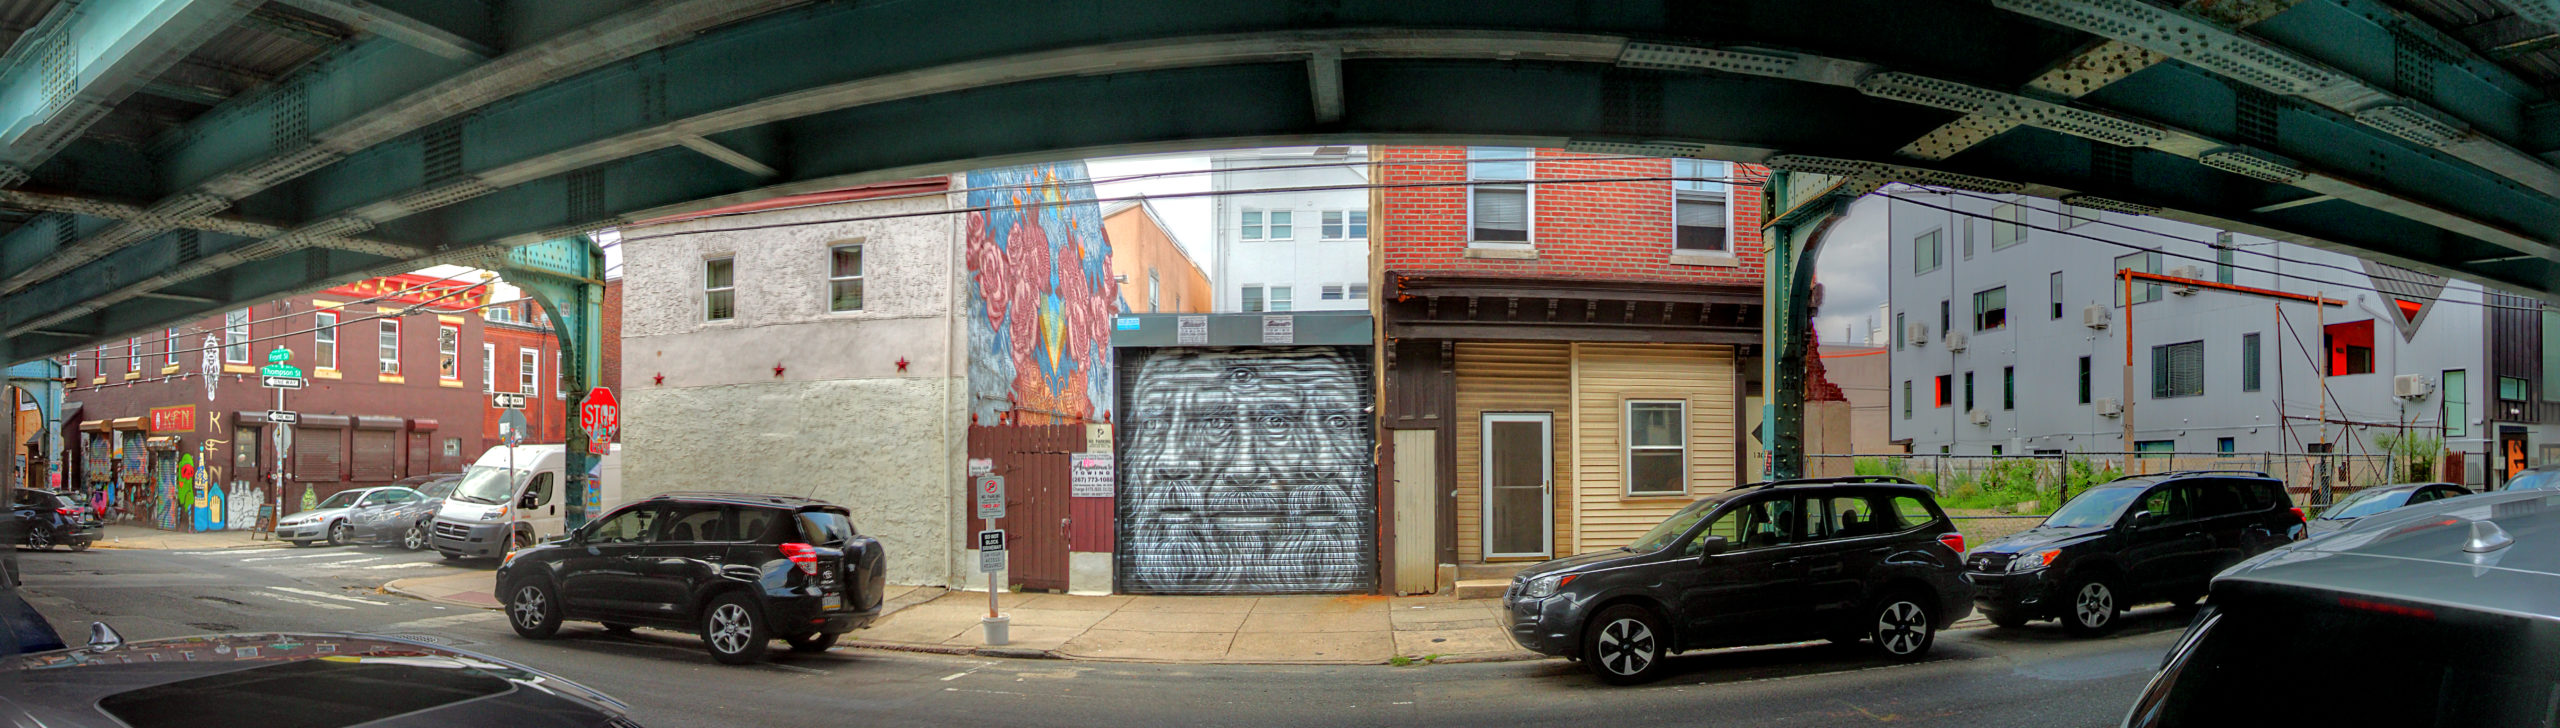 Street Art in Context Pyramid Oracle mural Under the "El" 1305 N Front St Philadelphia, PA Copyright 2020, Bob Bruhin. All rights reserved.